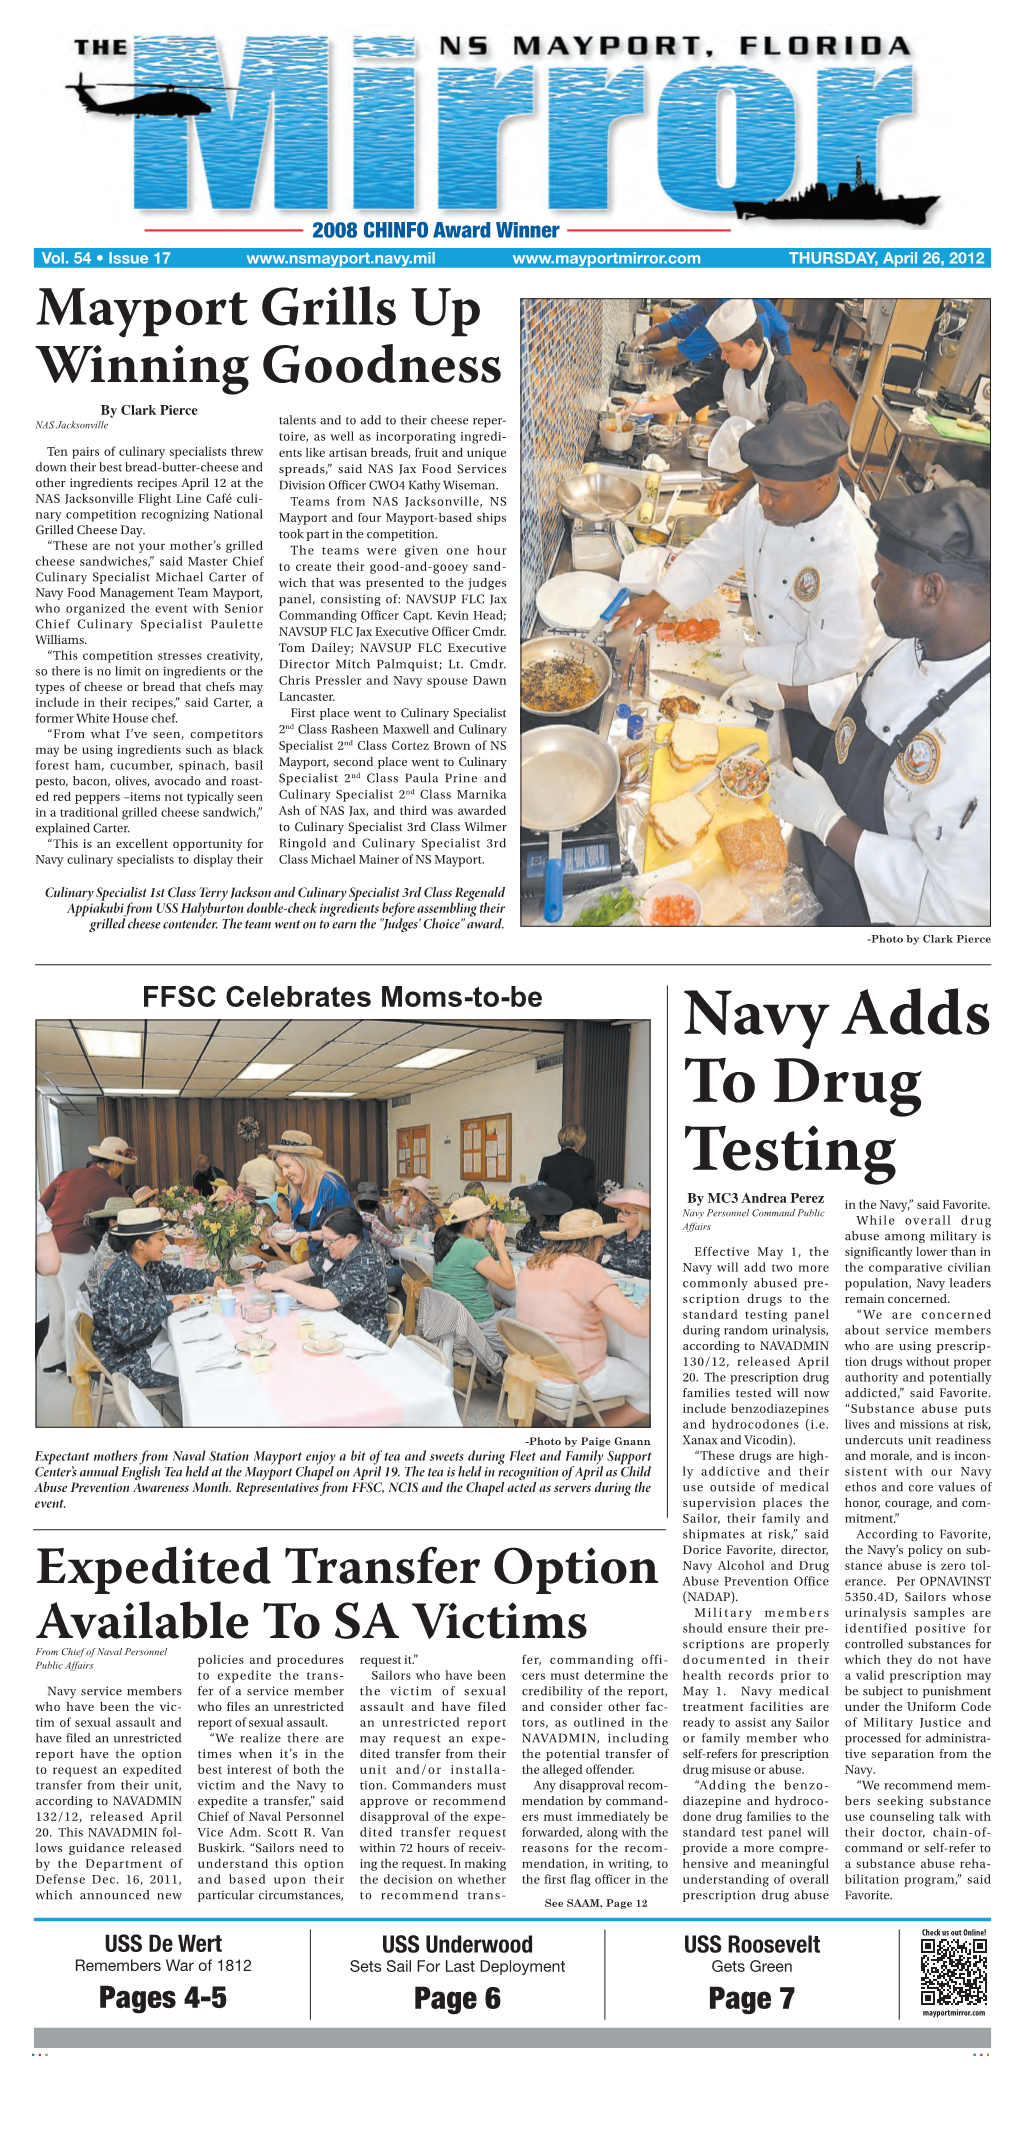 Navy Adds to Drug Testing